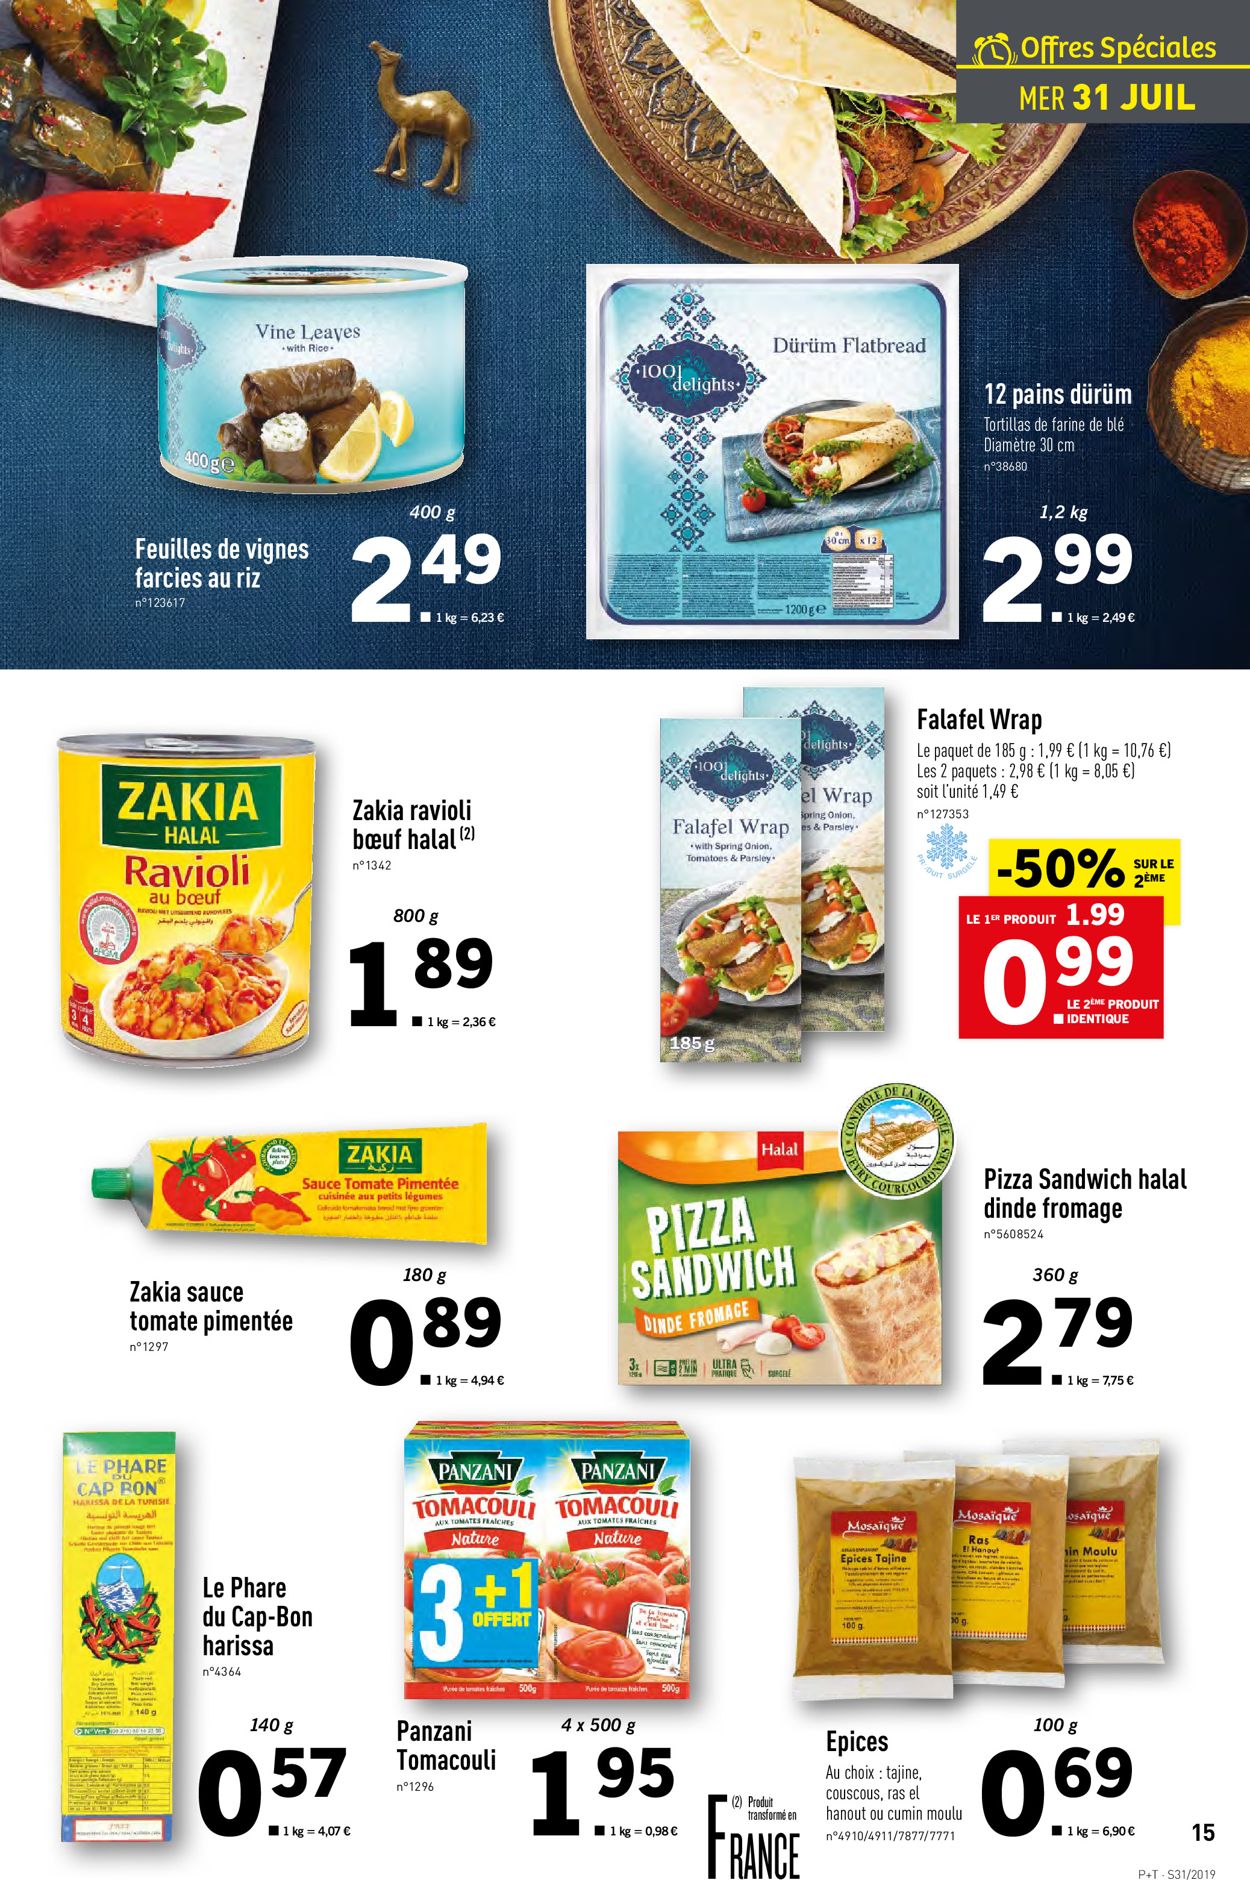 Lidl Catalogue - 31.07-06.08.2019 (Page 15)